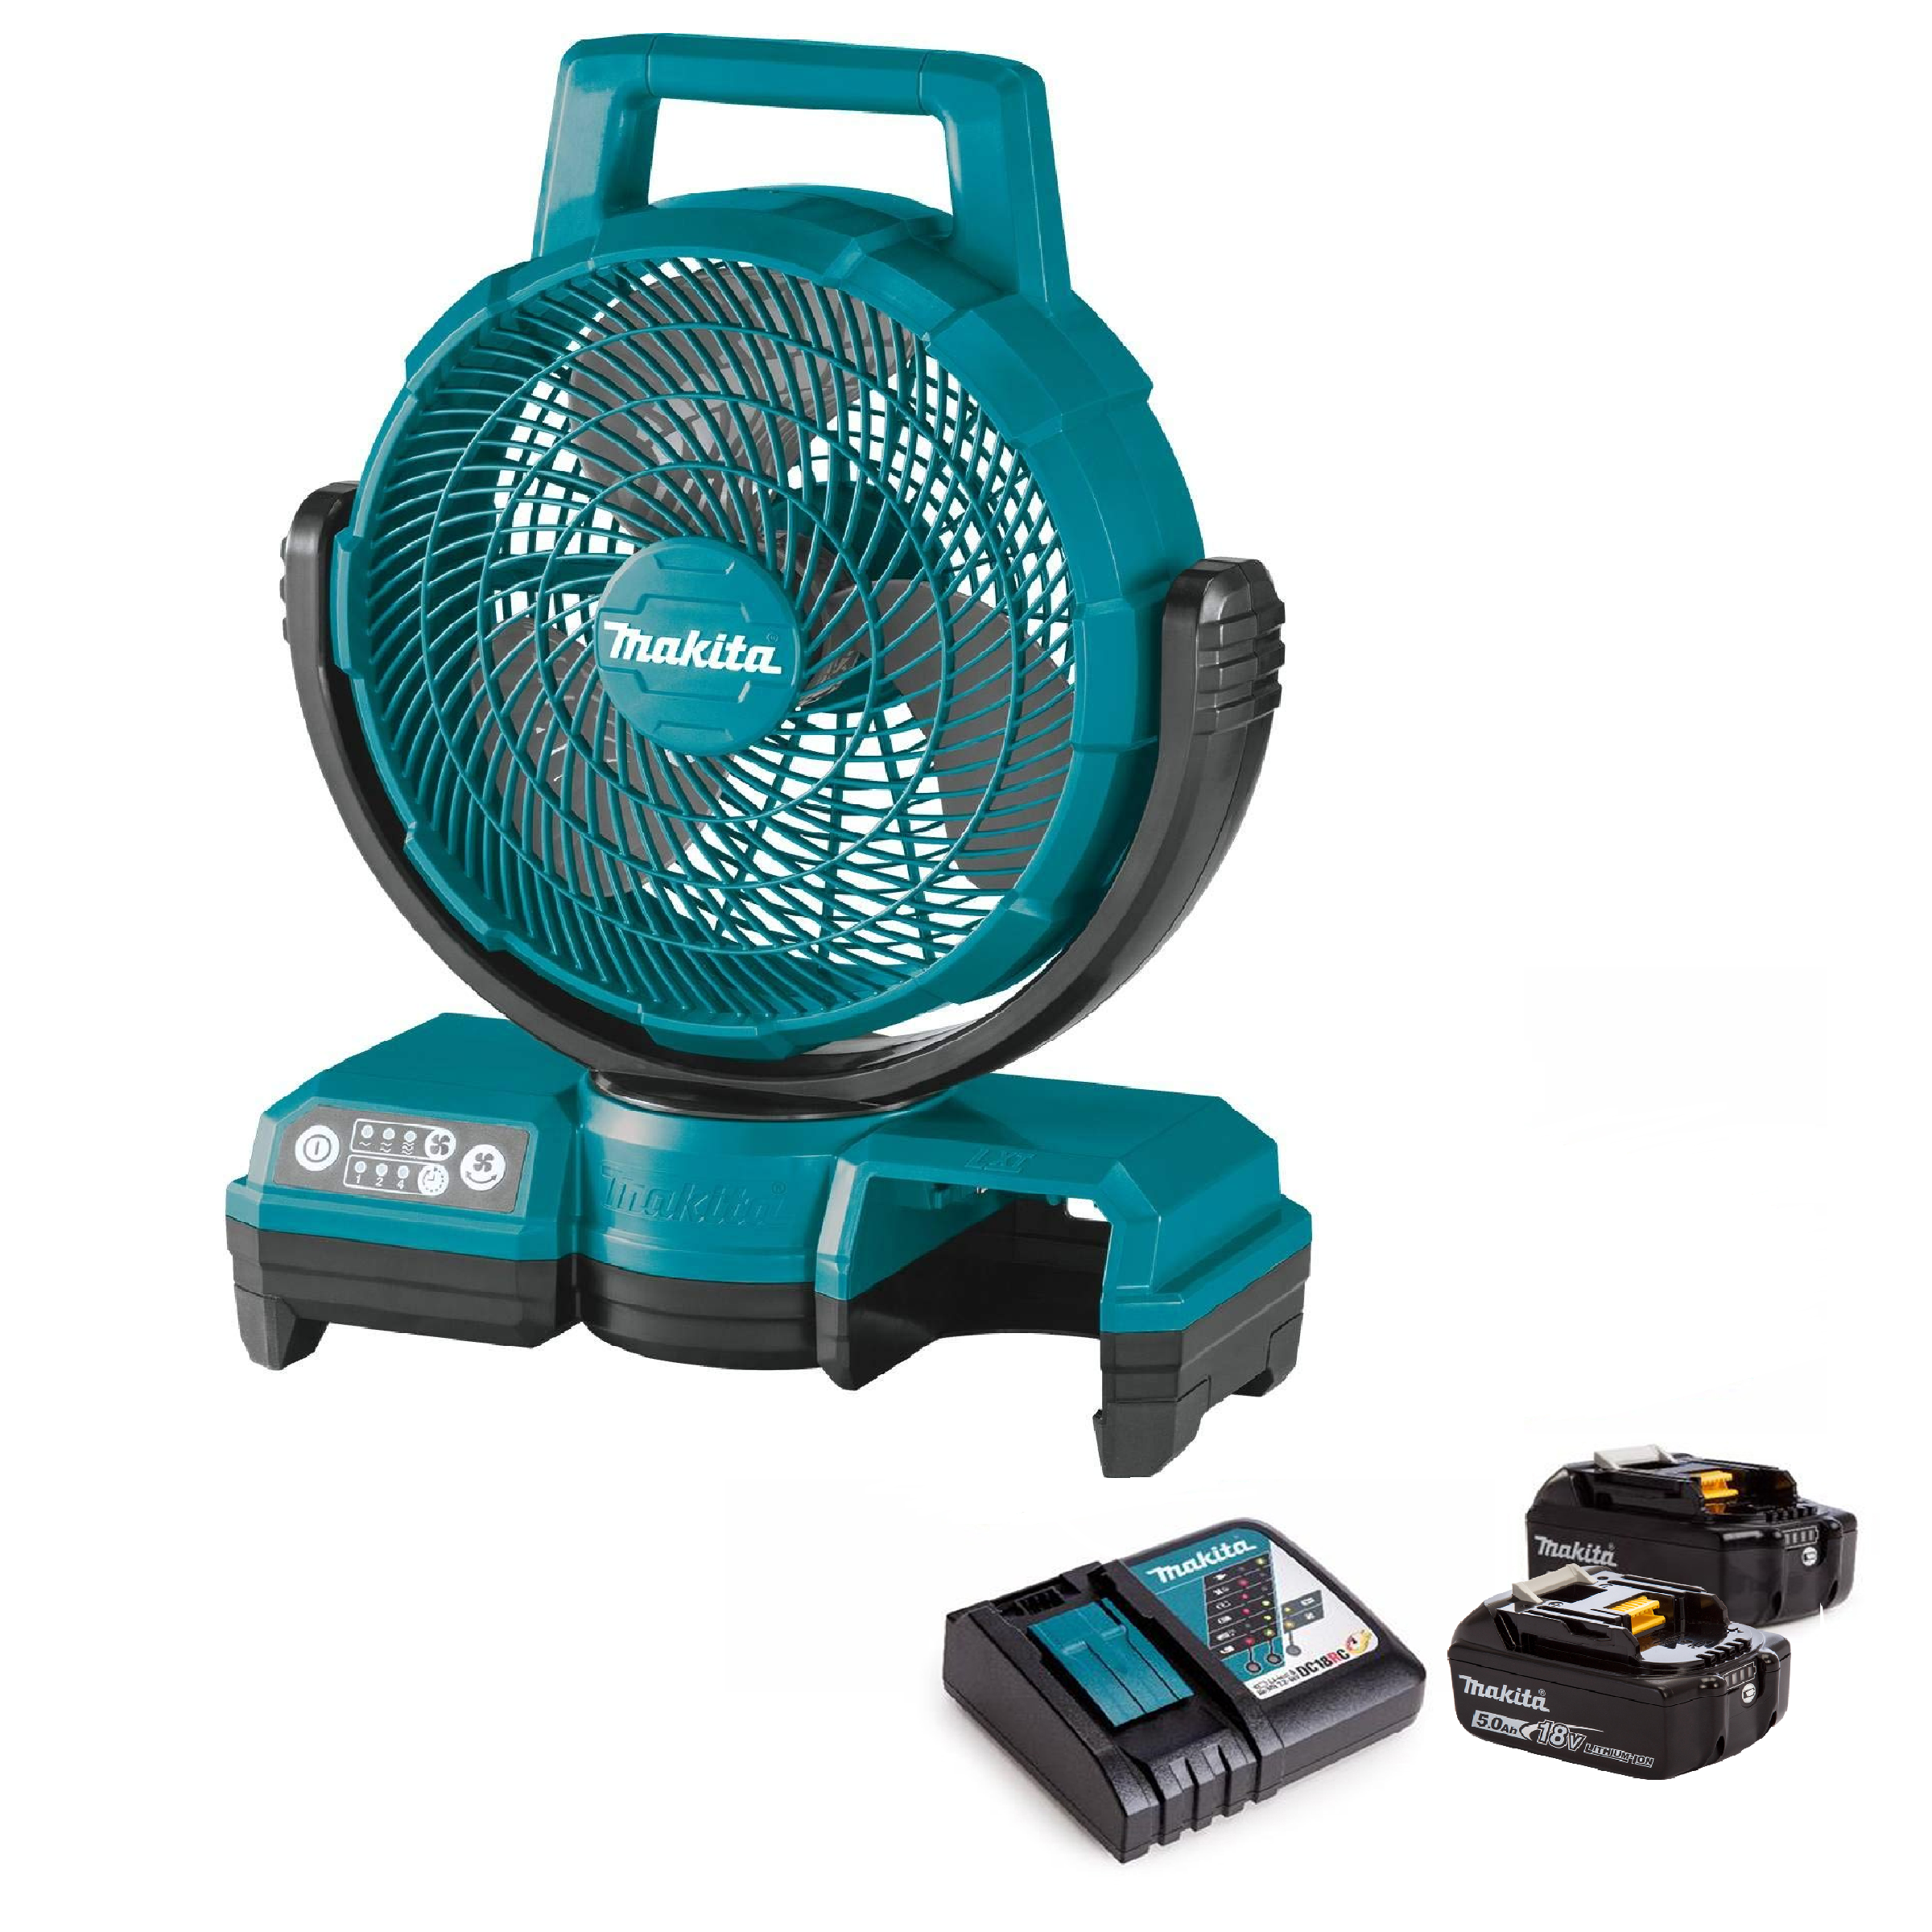 Makita DCF203Z Cordless Power Fan PLUS 2 X 18V 5.0AH LI-ION Battery And Rapid Charger